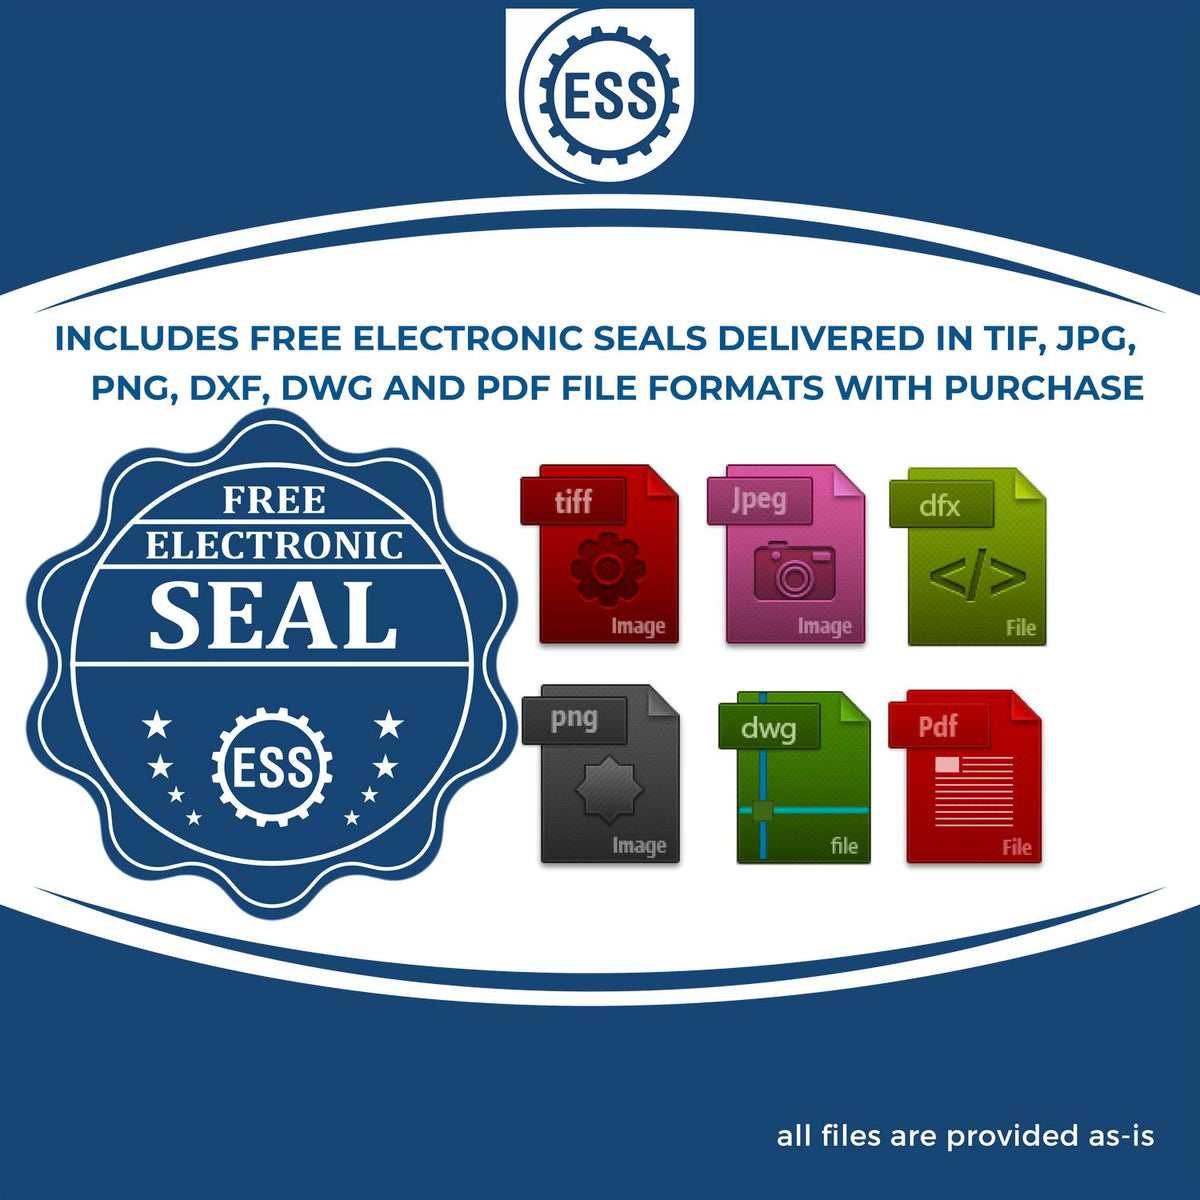 An infographic for the free electronic seal for the Hybrid Indiana Geologist Seal illustrating the different file type icons such as DXF, DWG, TIF, JPG and PNG.